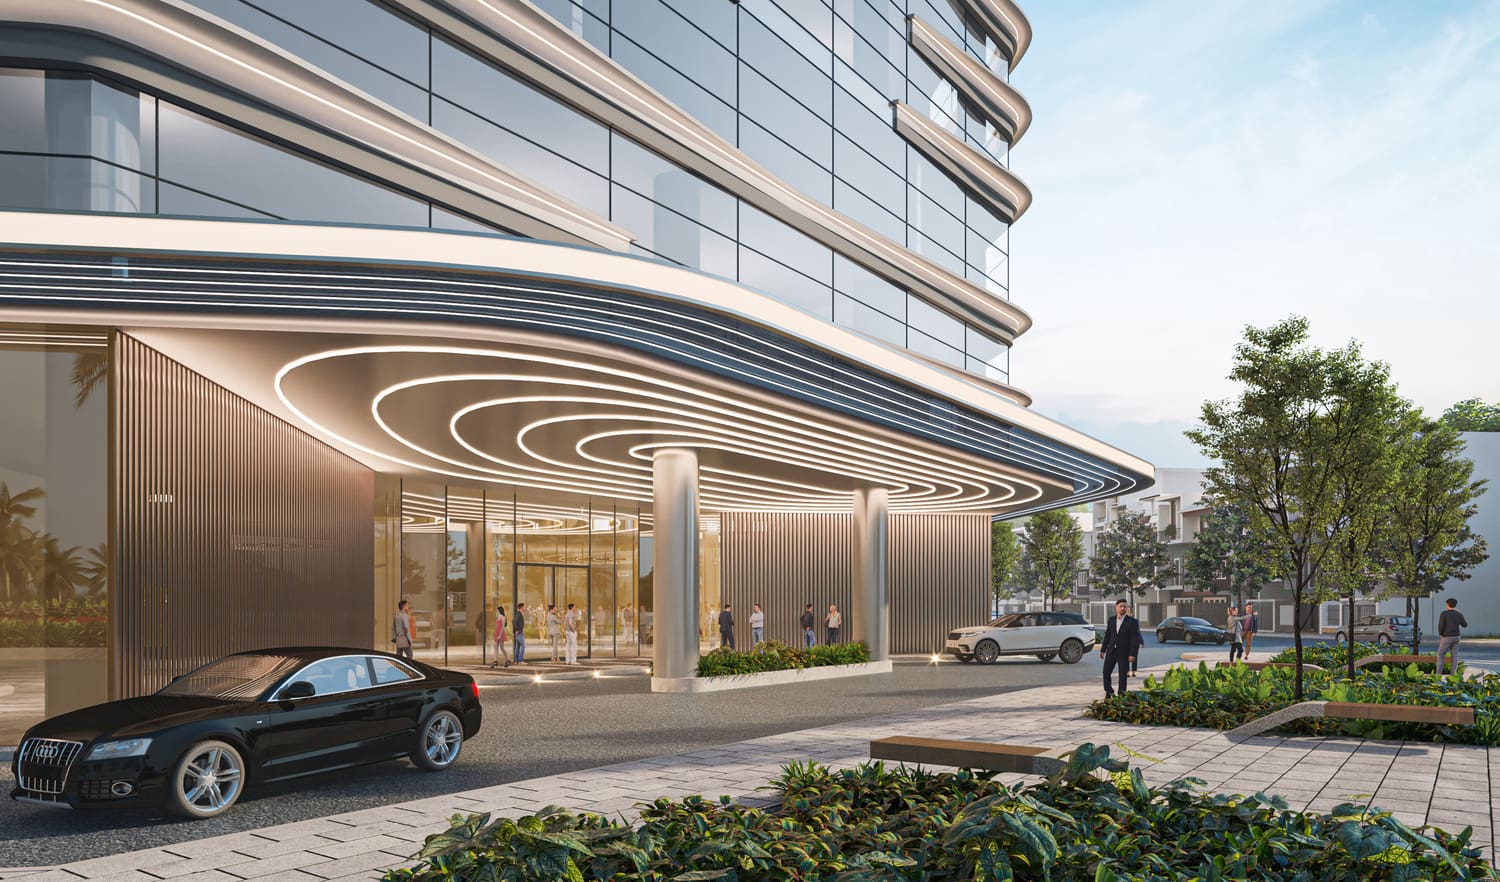 rendered image of drop-off area the Marriott and Centara